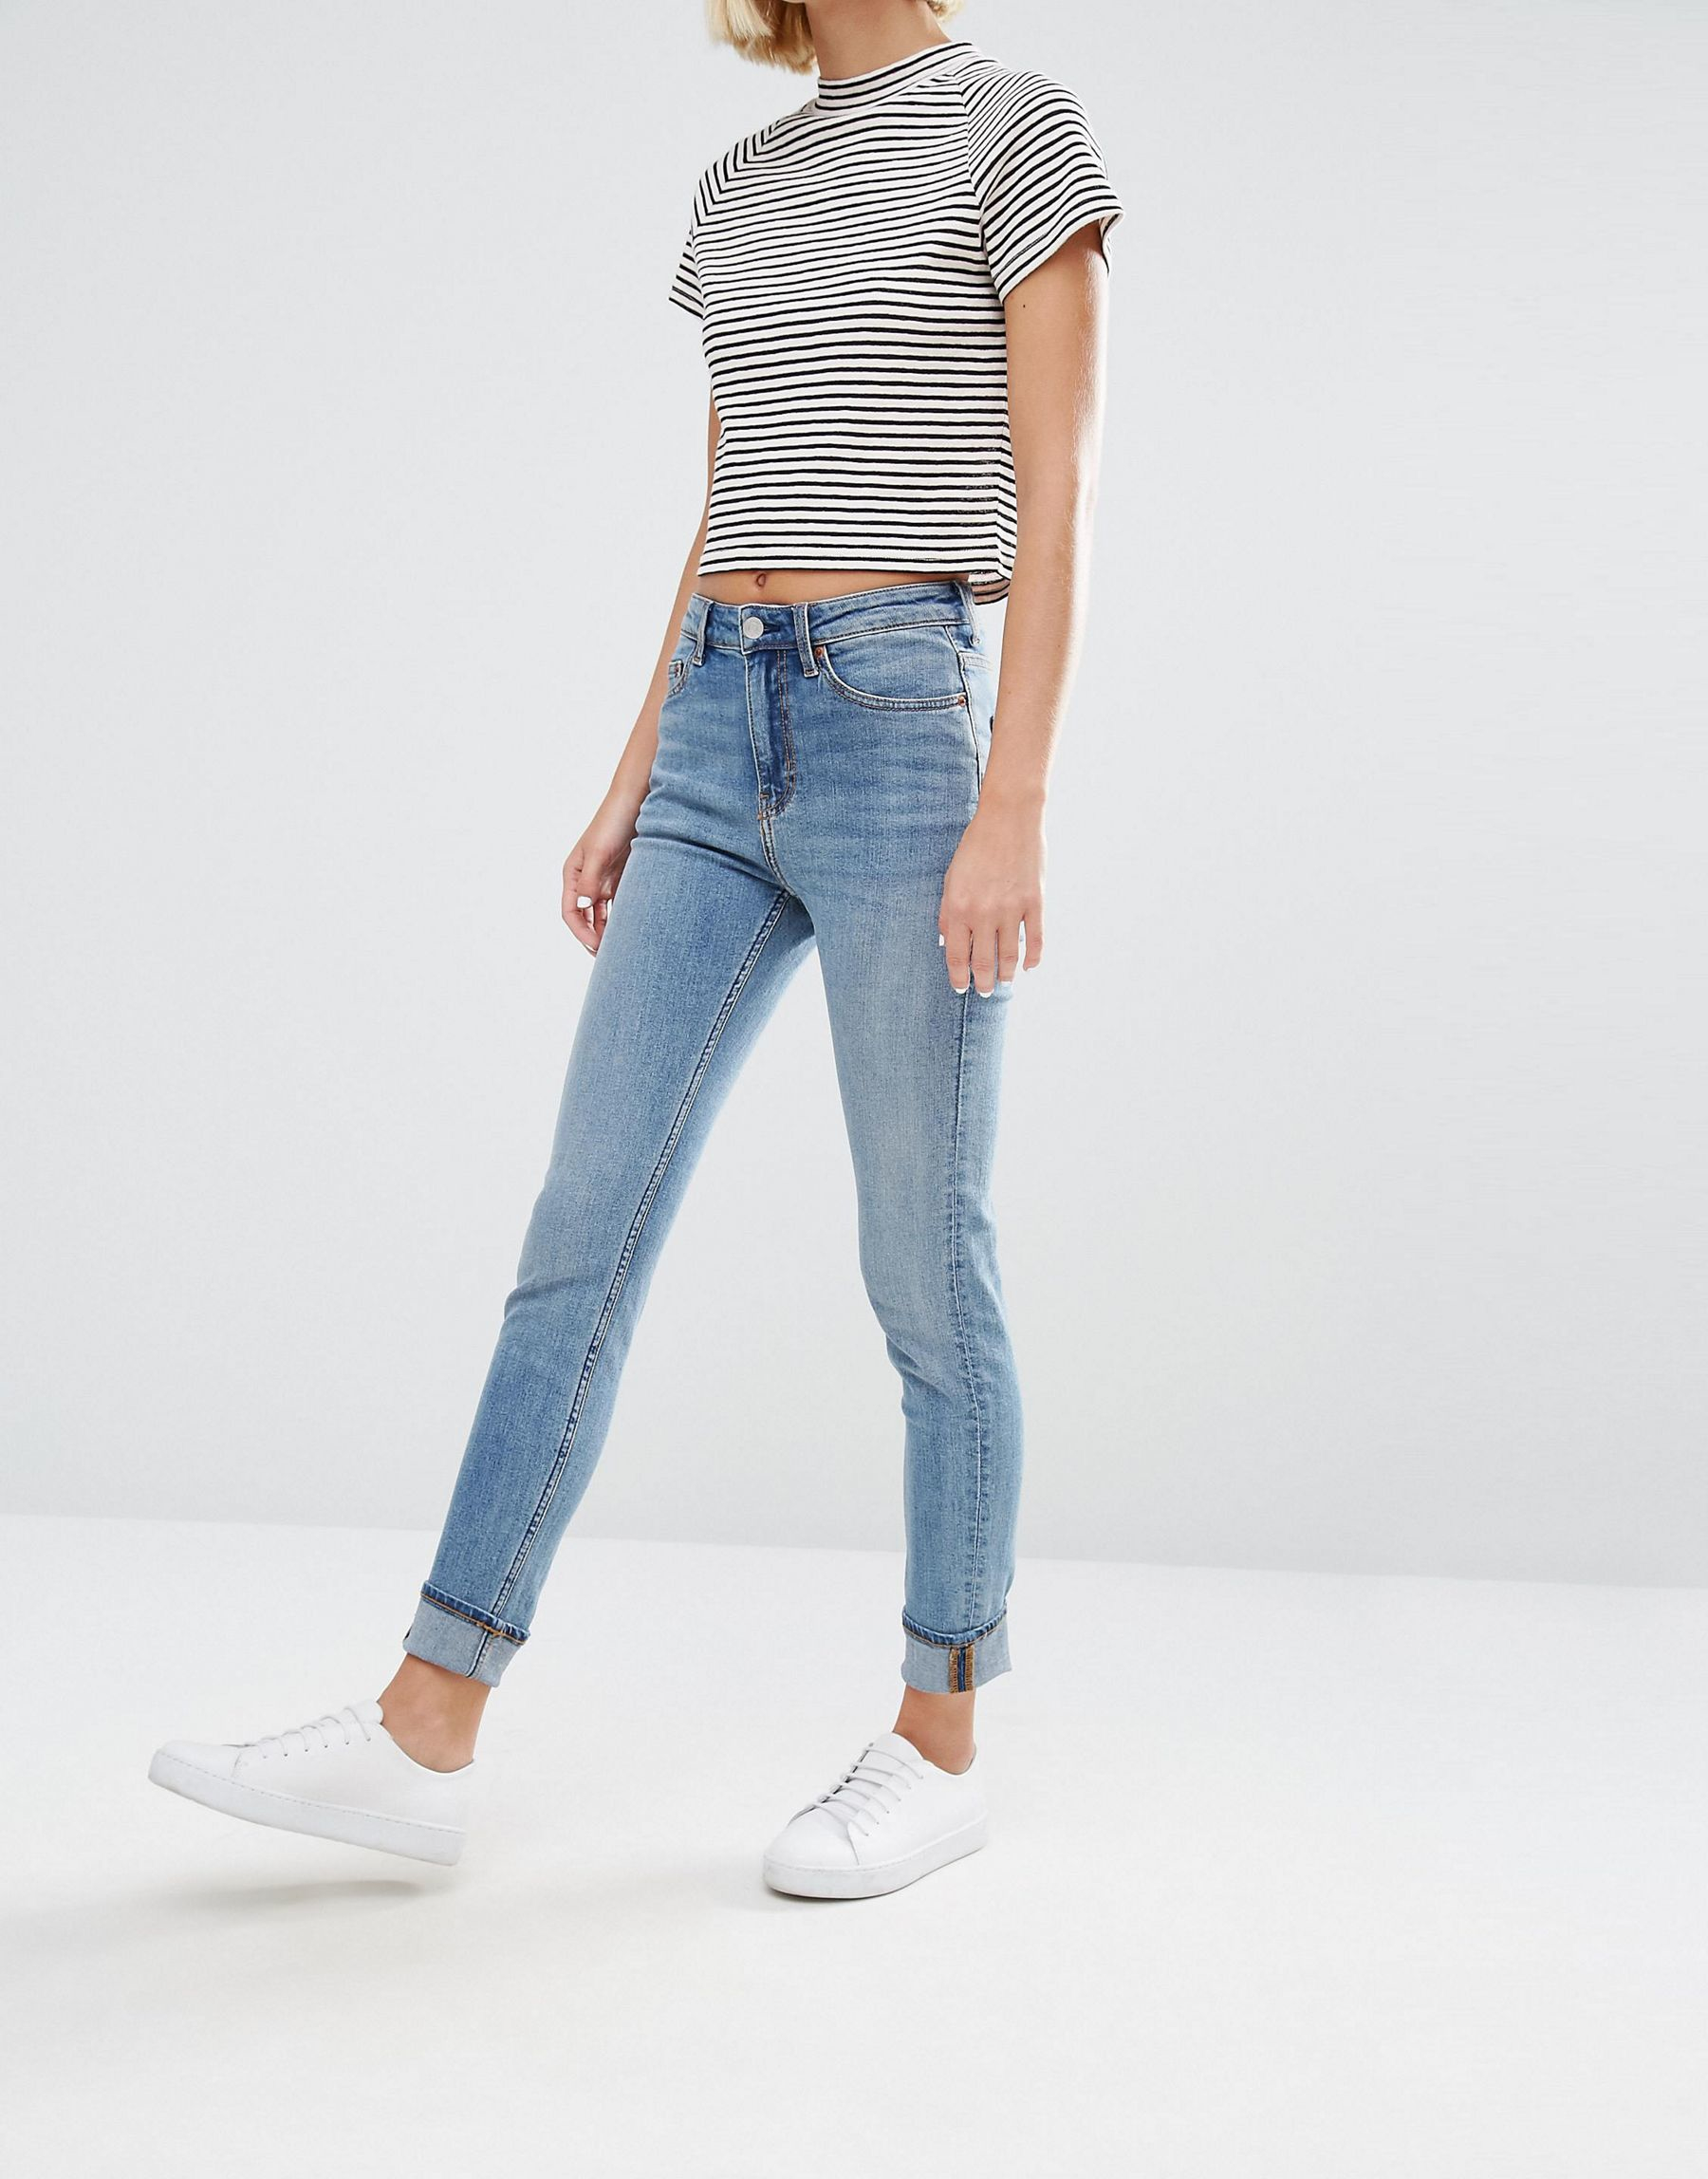 Weekday Thursday High Waist Skinny Jeans in Blue | Lyst